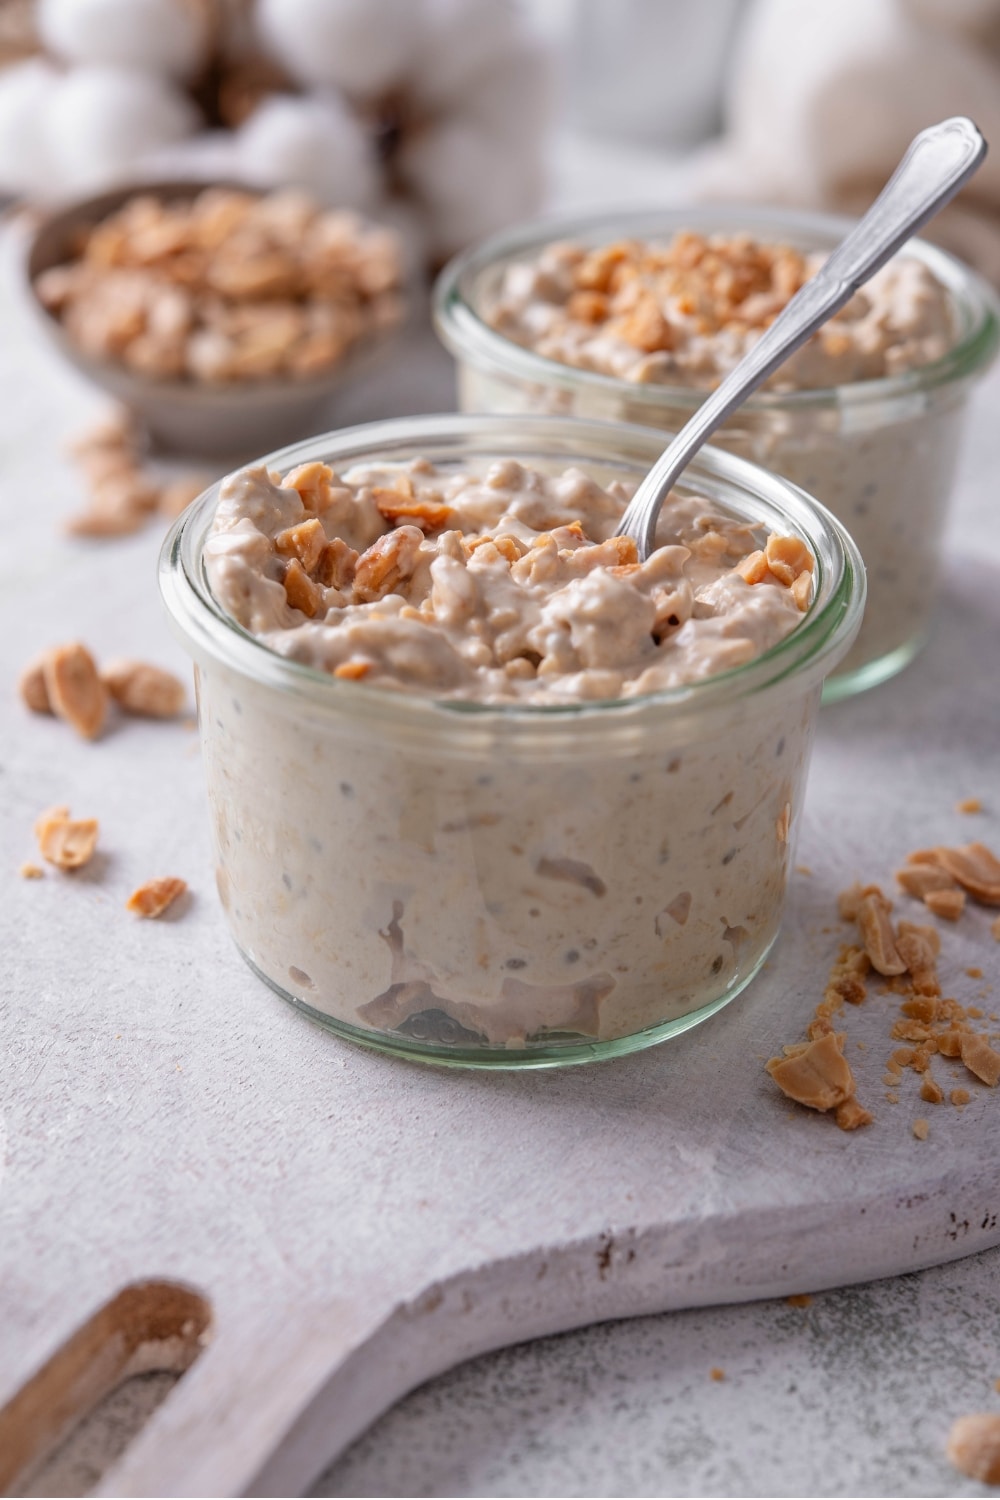 A small glass jar filled with peanut butter overnight oats on top of a wooden serving board with peanuts sprinkled around it. There is a spoon dipped into the jar.